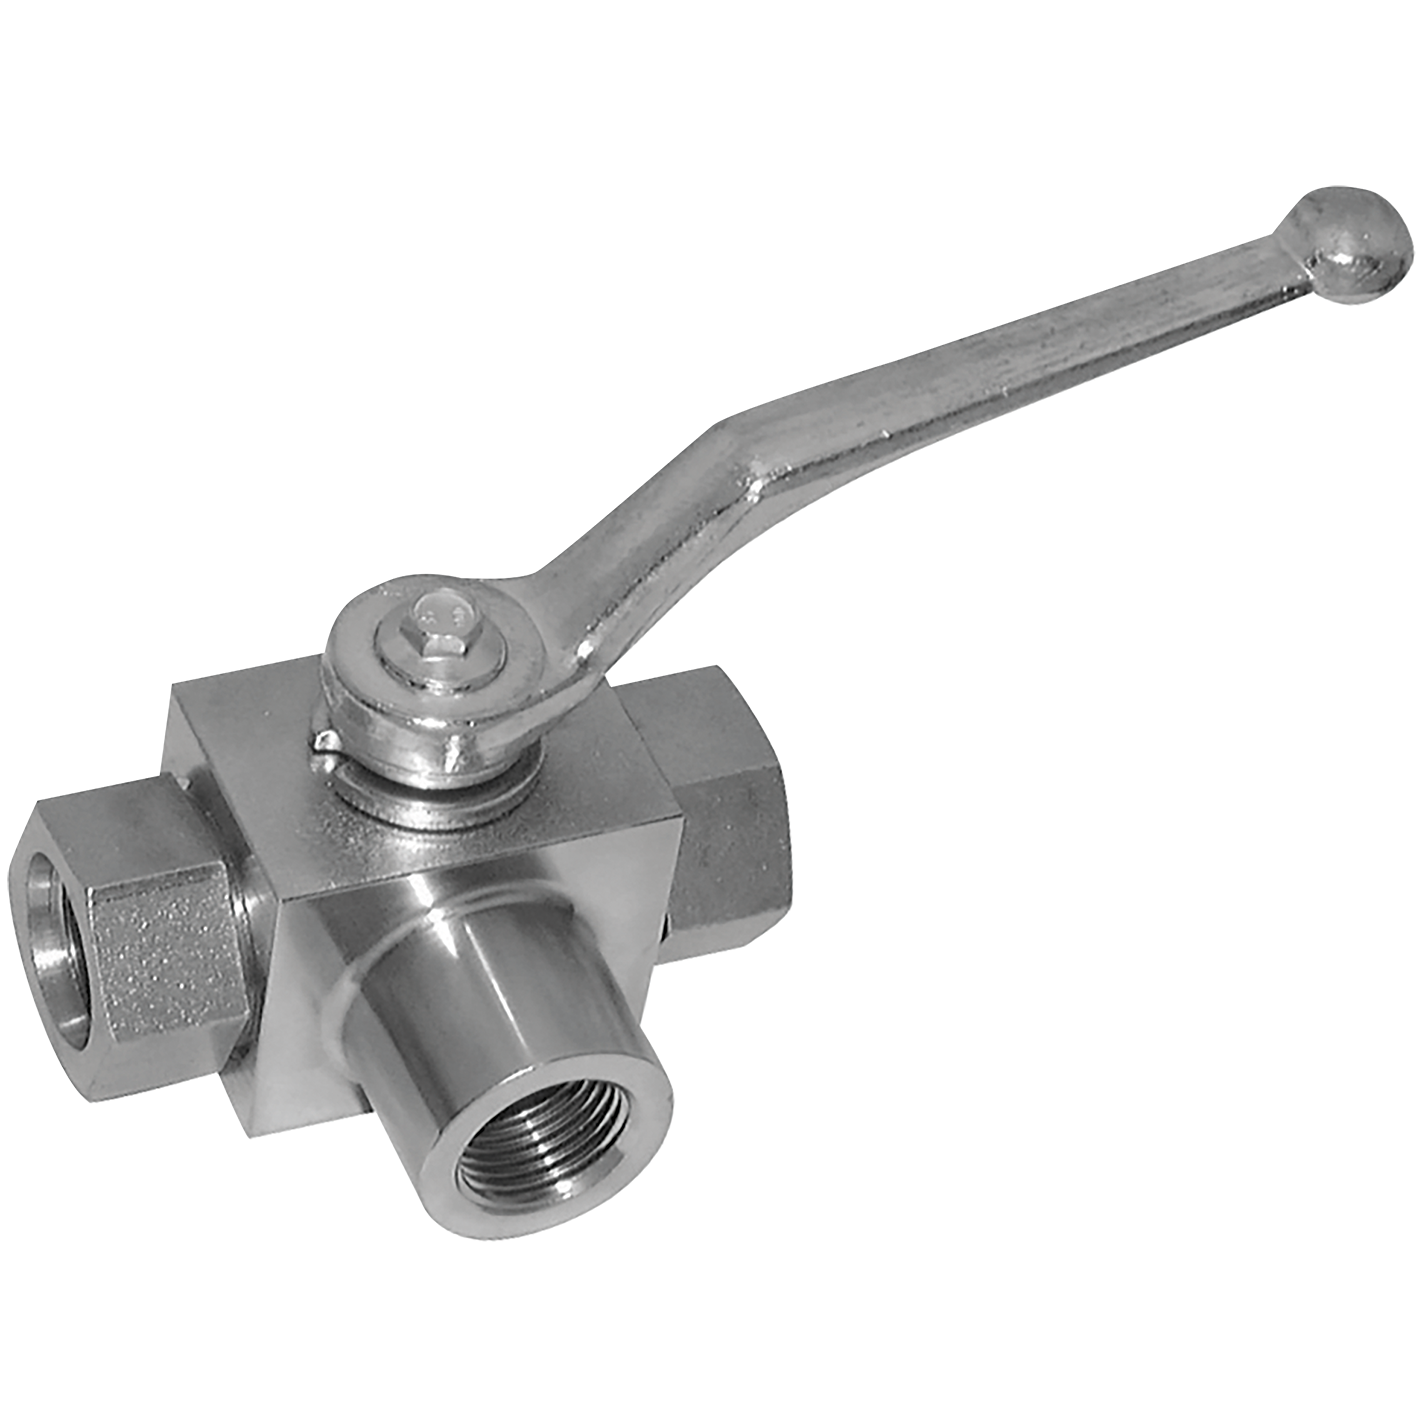 1.1/4" BSP Parallel Female 3 Way L Ported Ball Valve